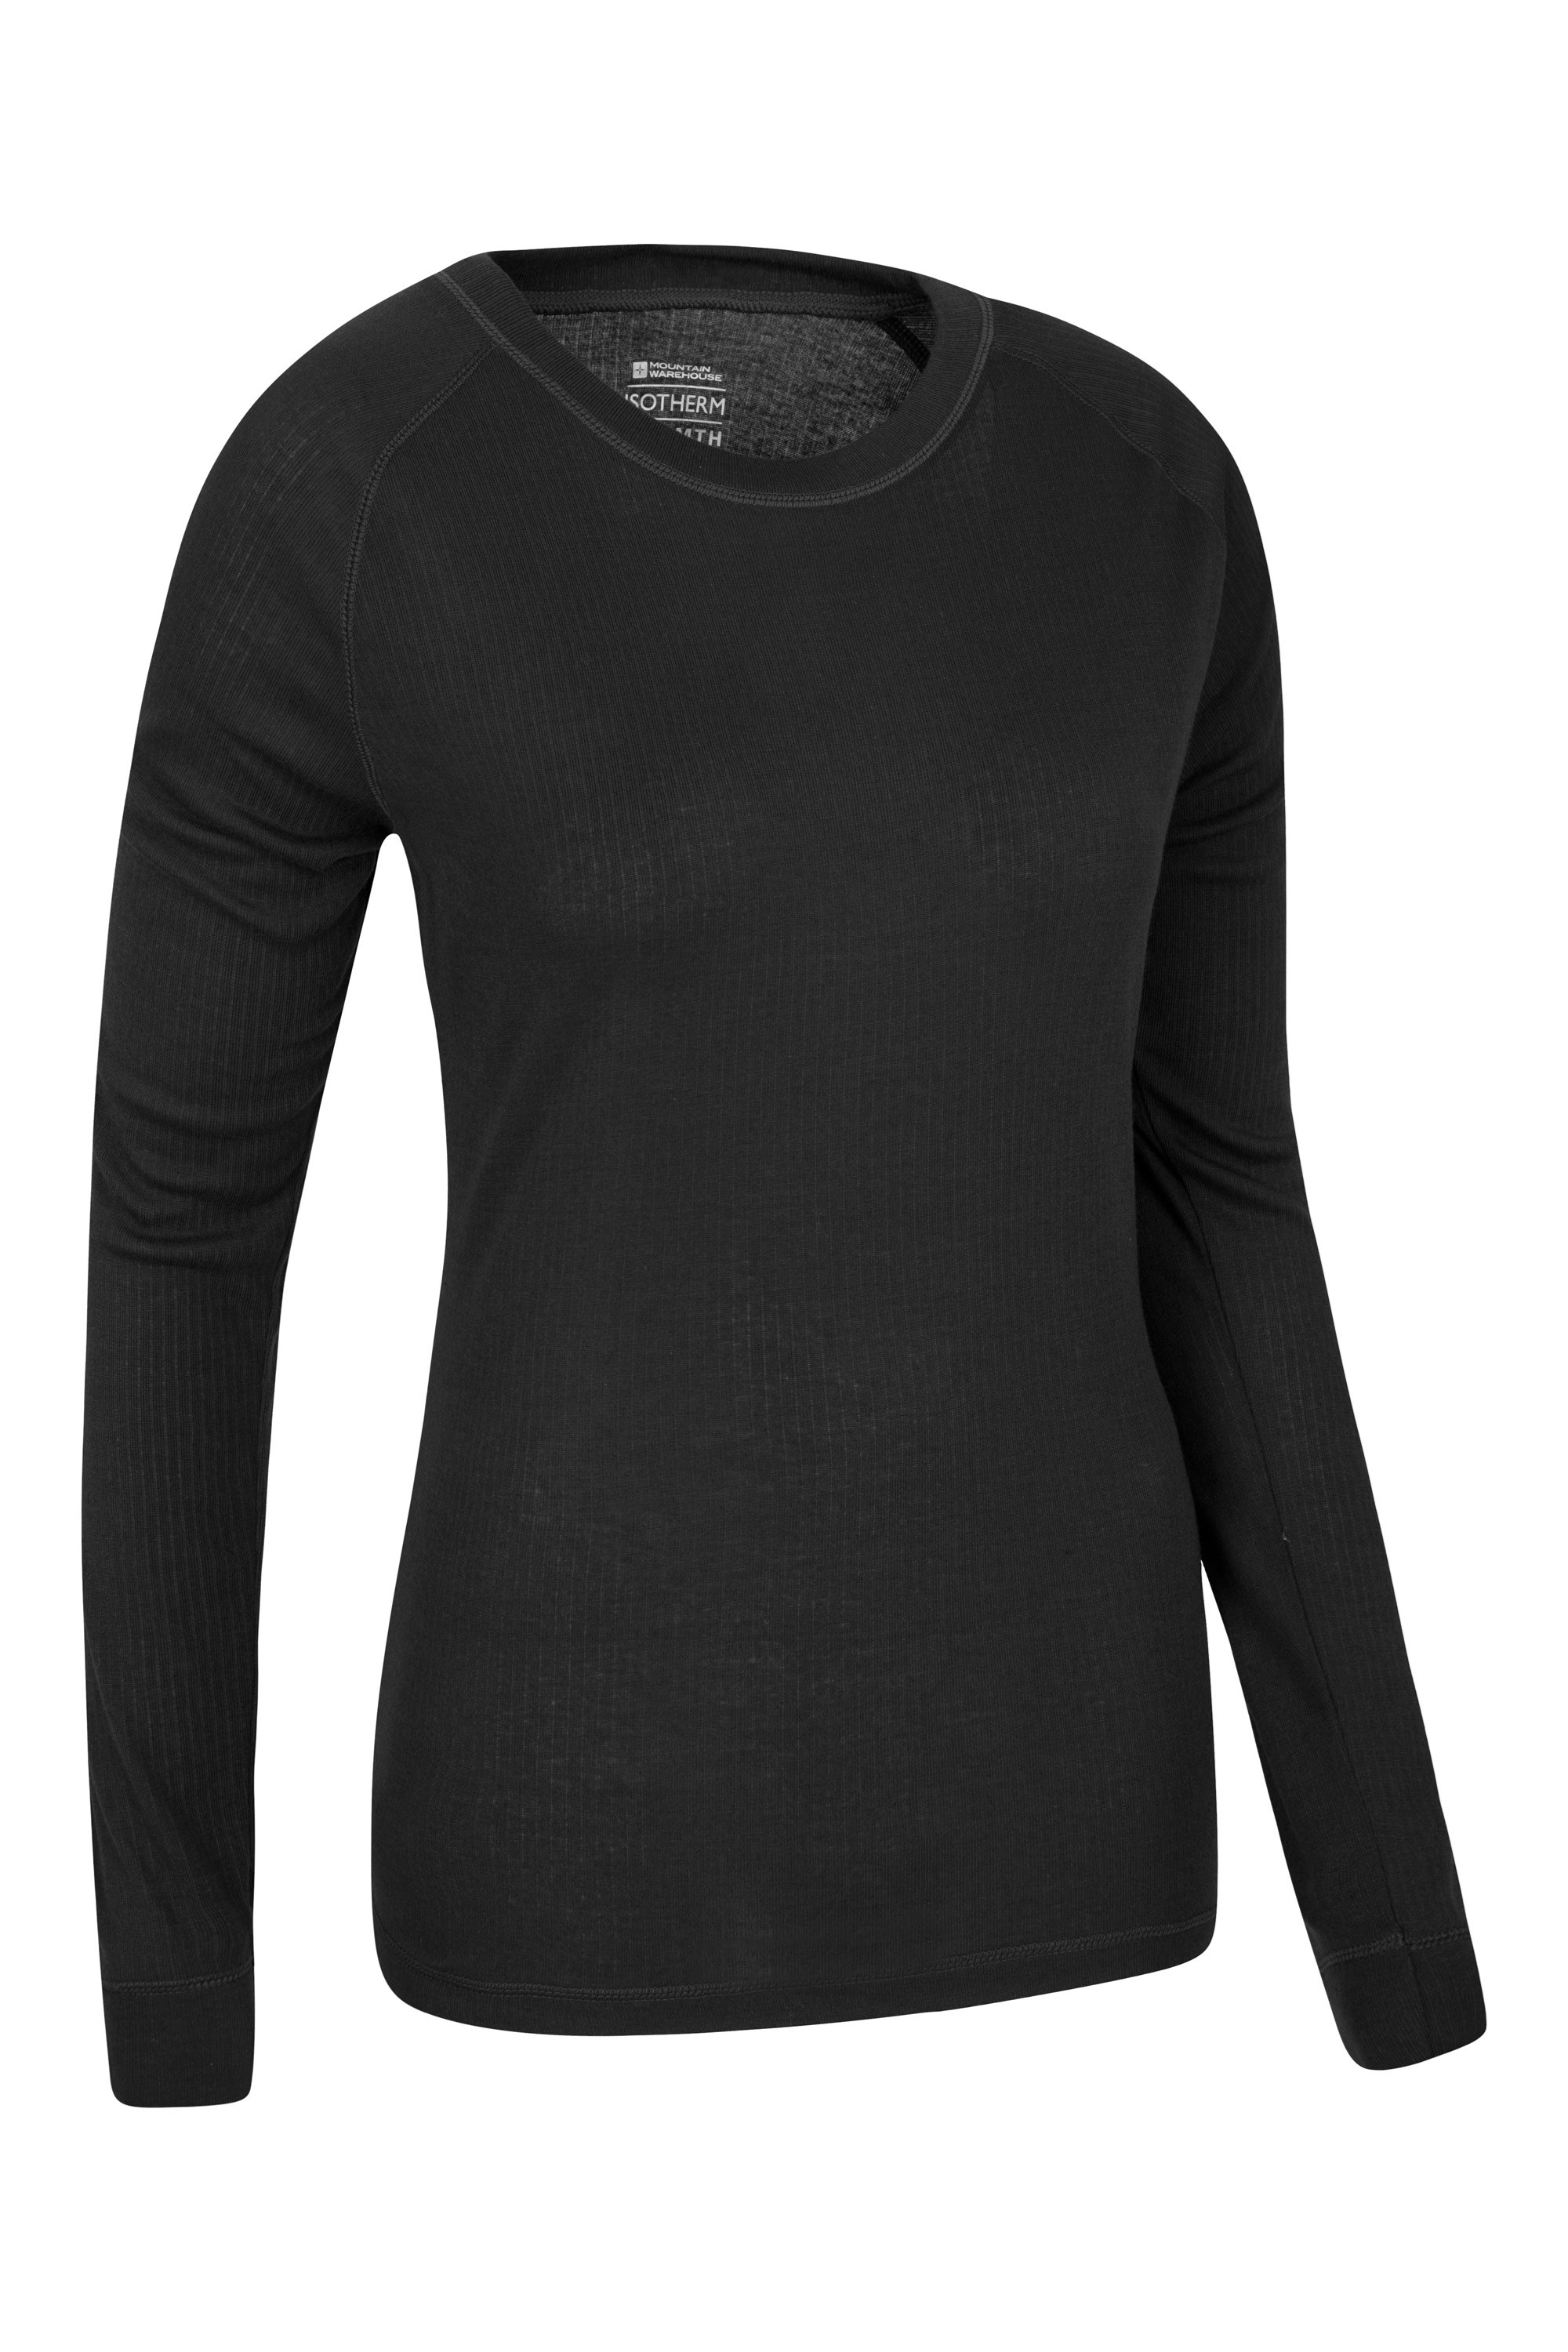 Lightweight Compression Base Layer Winter Fleece Lined Crew Neck Shirts ATHLIO 1 or 2 Pack Womens Thermal Long Sleeve Tops 